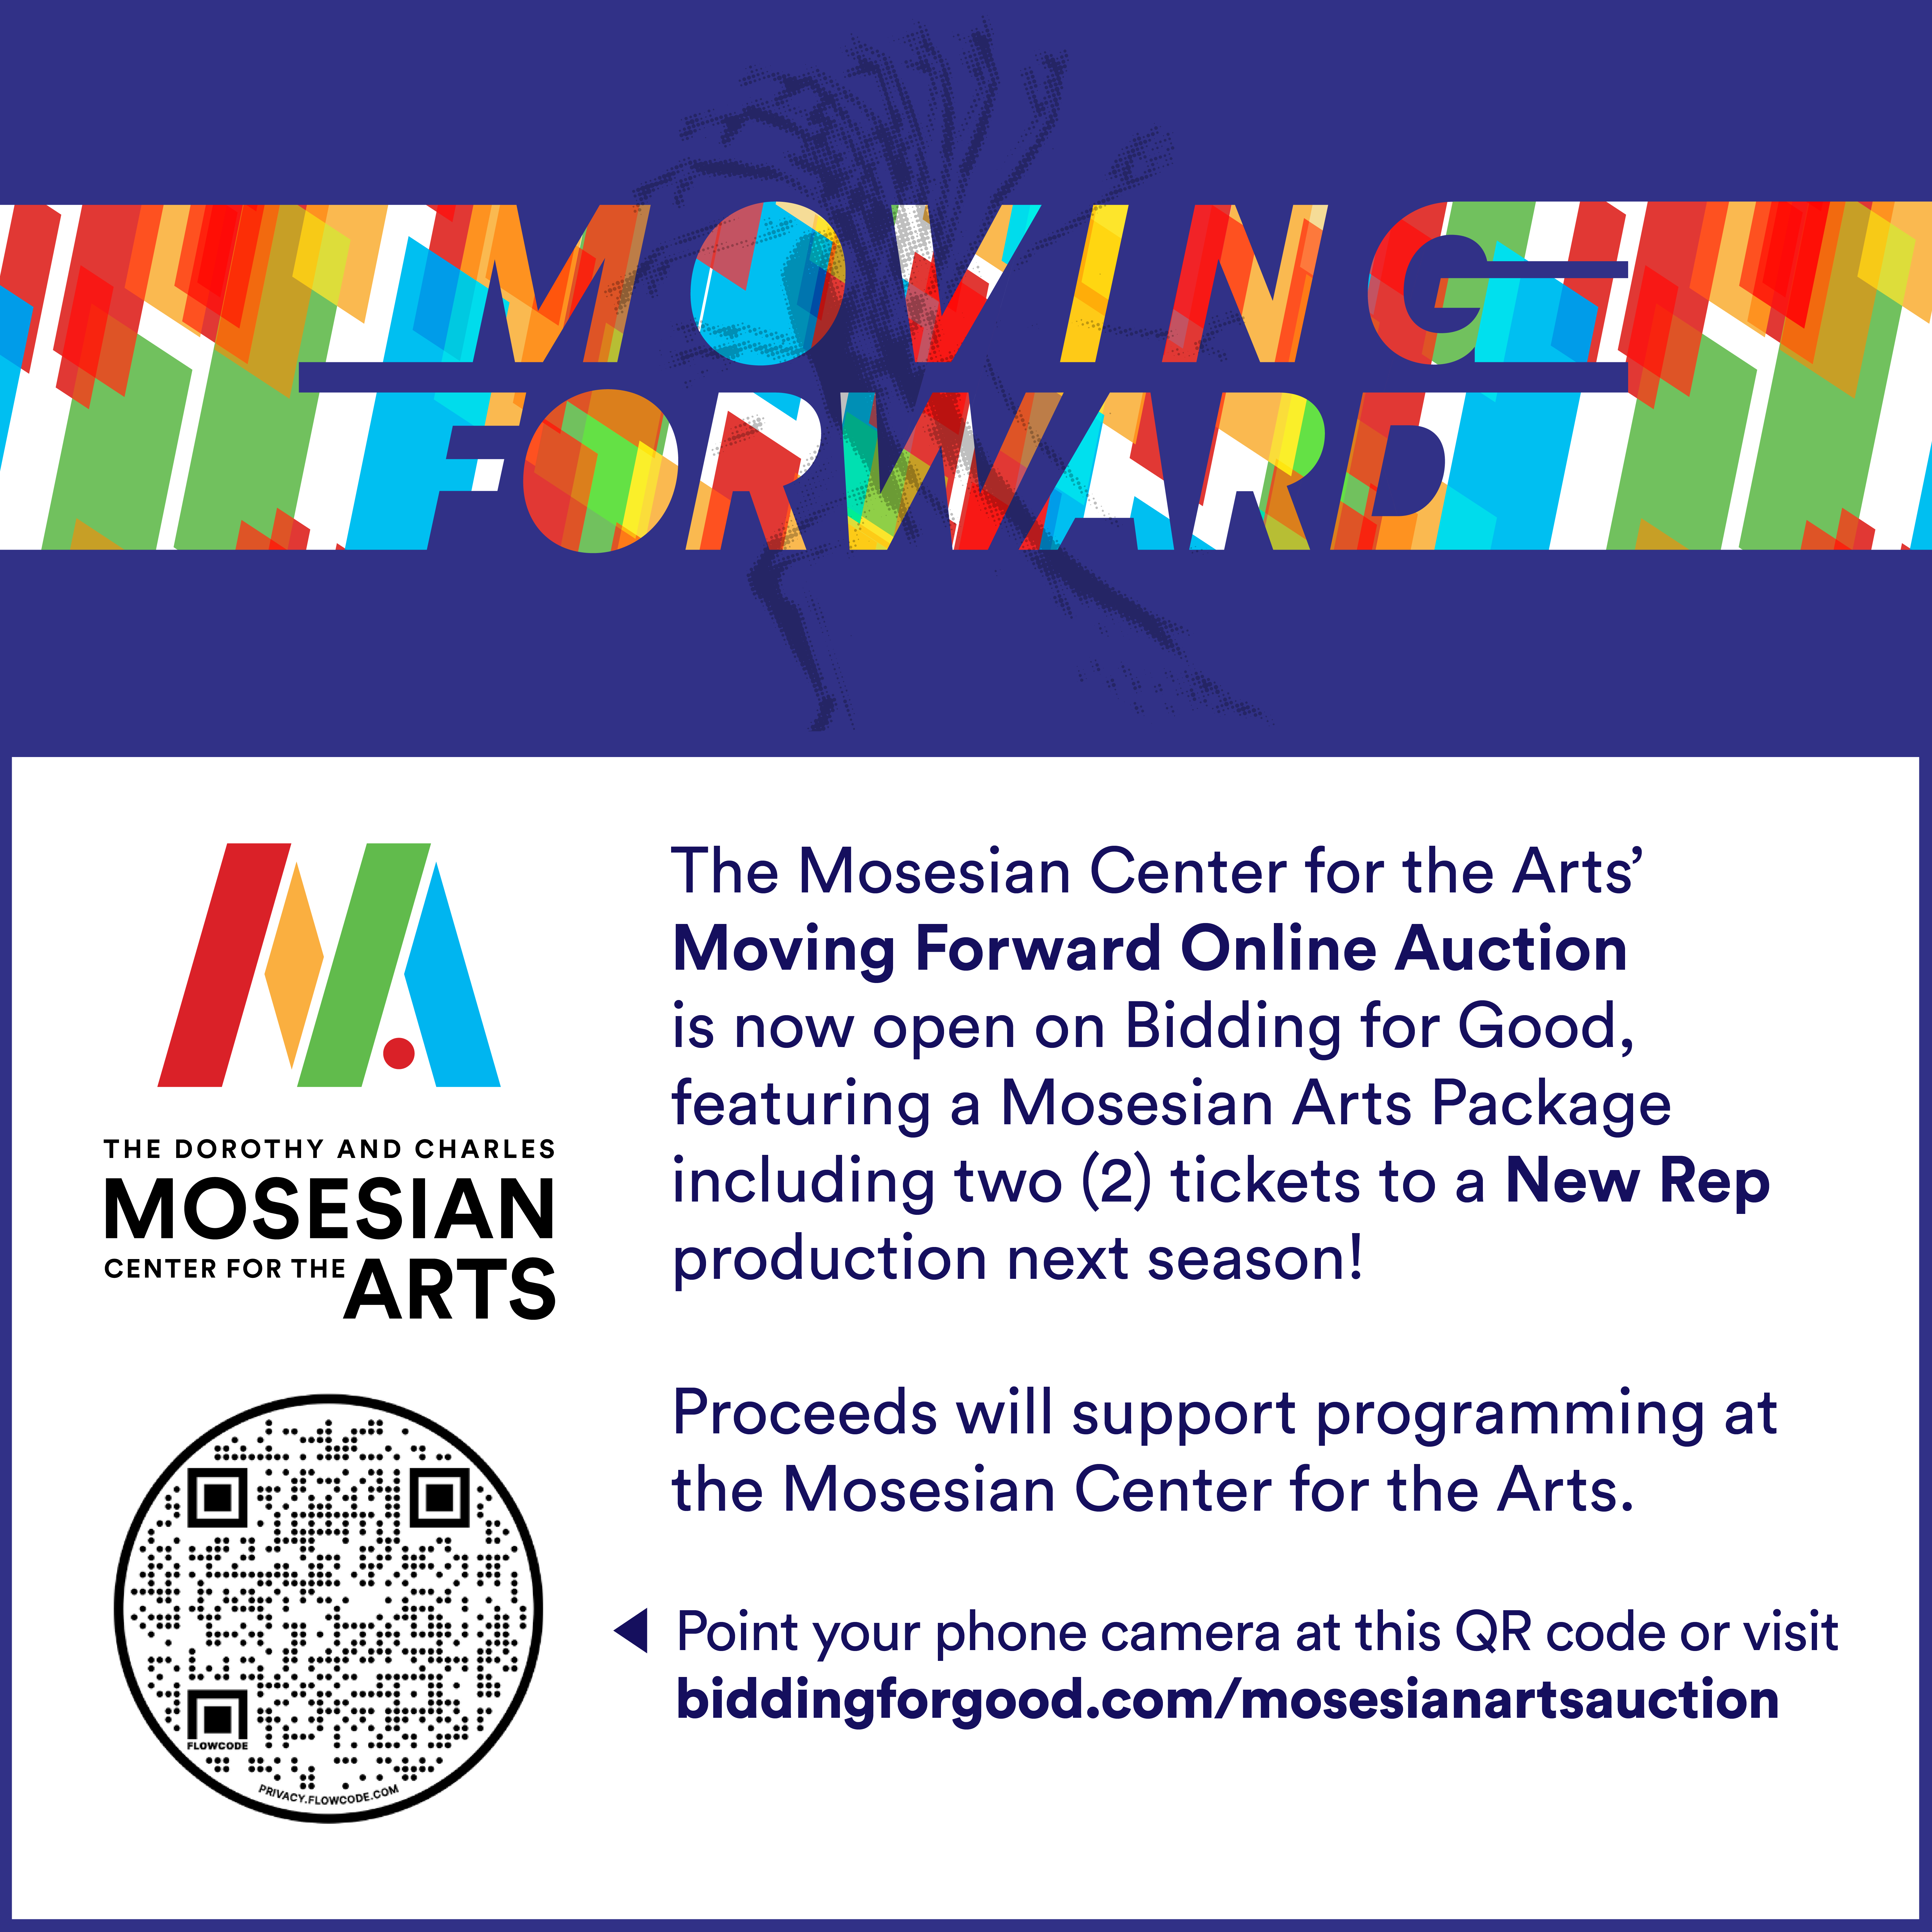 The Mosesian Center for the Arts